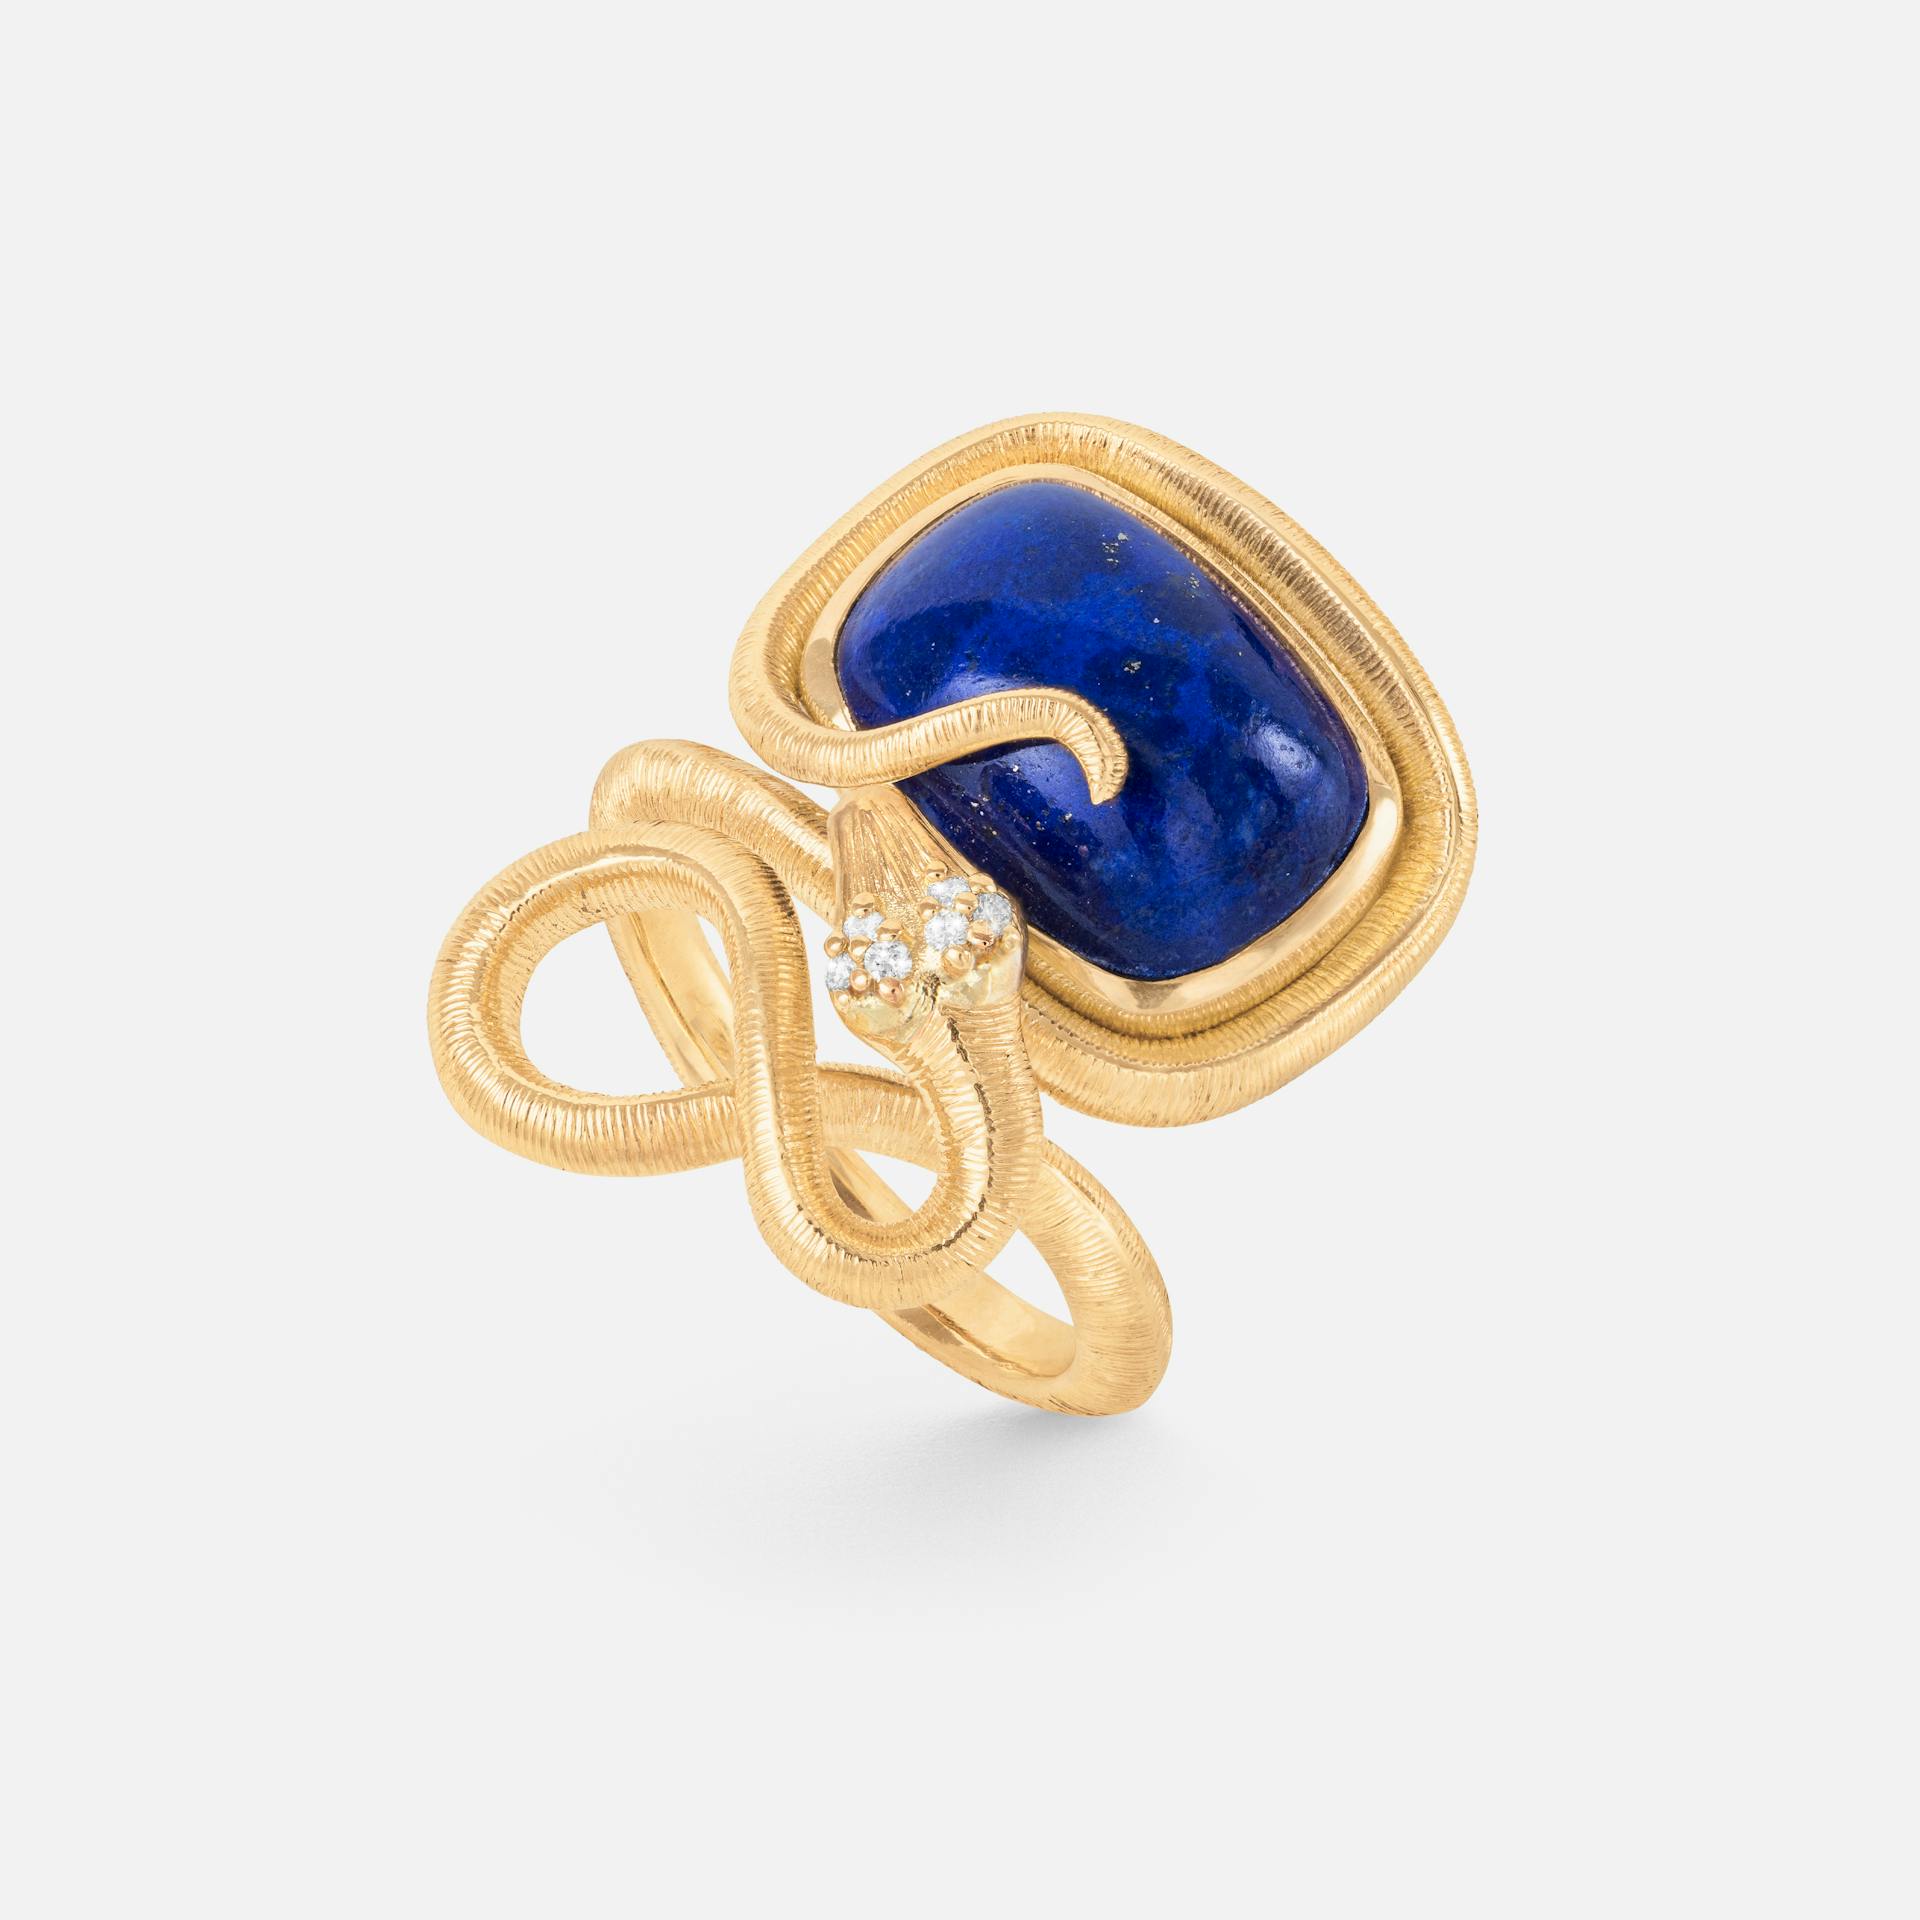 Snakes Ring in Yellow Gold with Lapis Lazuli and Diamonds  |  Ole Lynggaard Copenhagen 